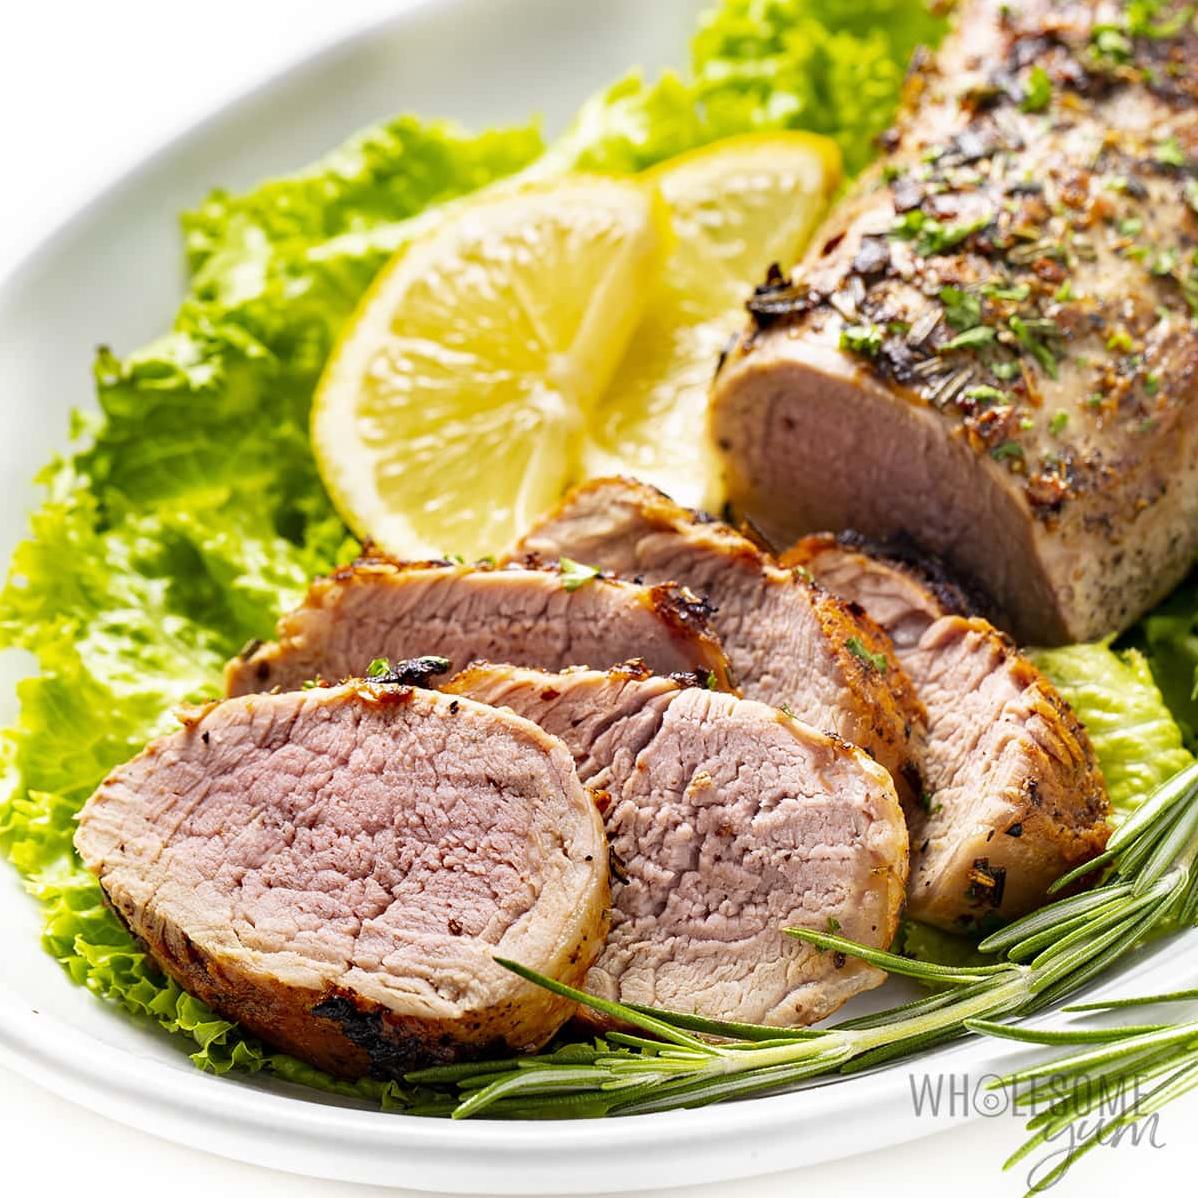  A delicious pork loin that will wow your guests